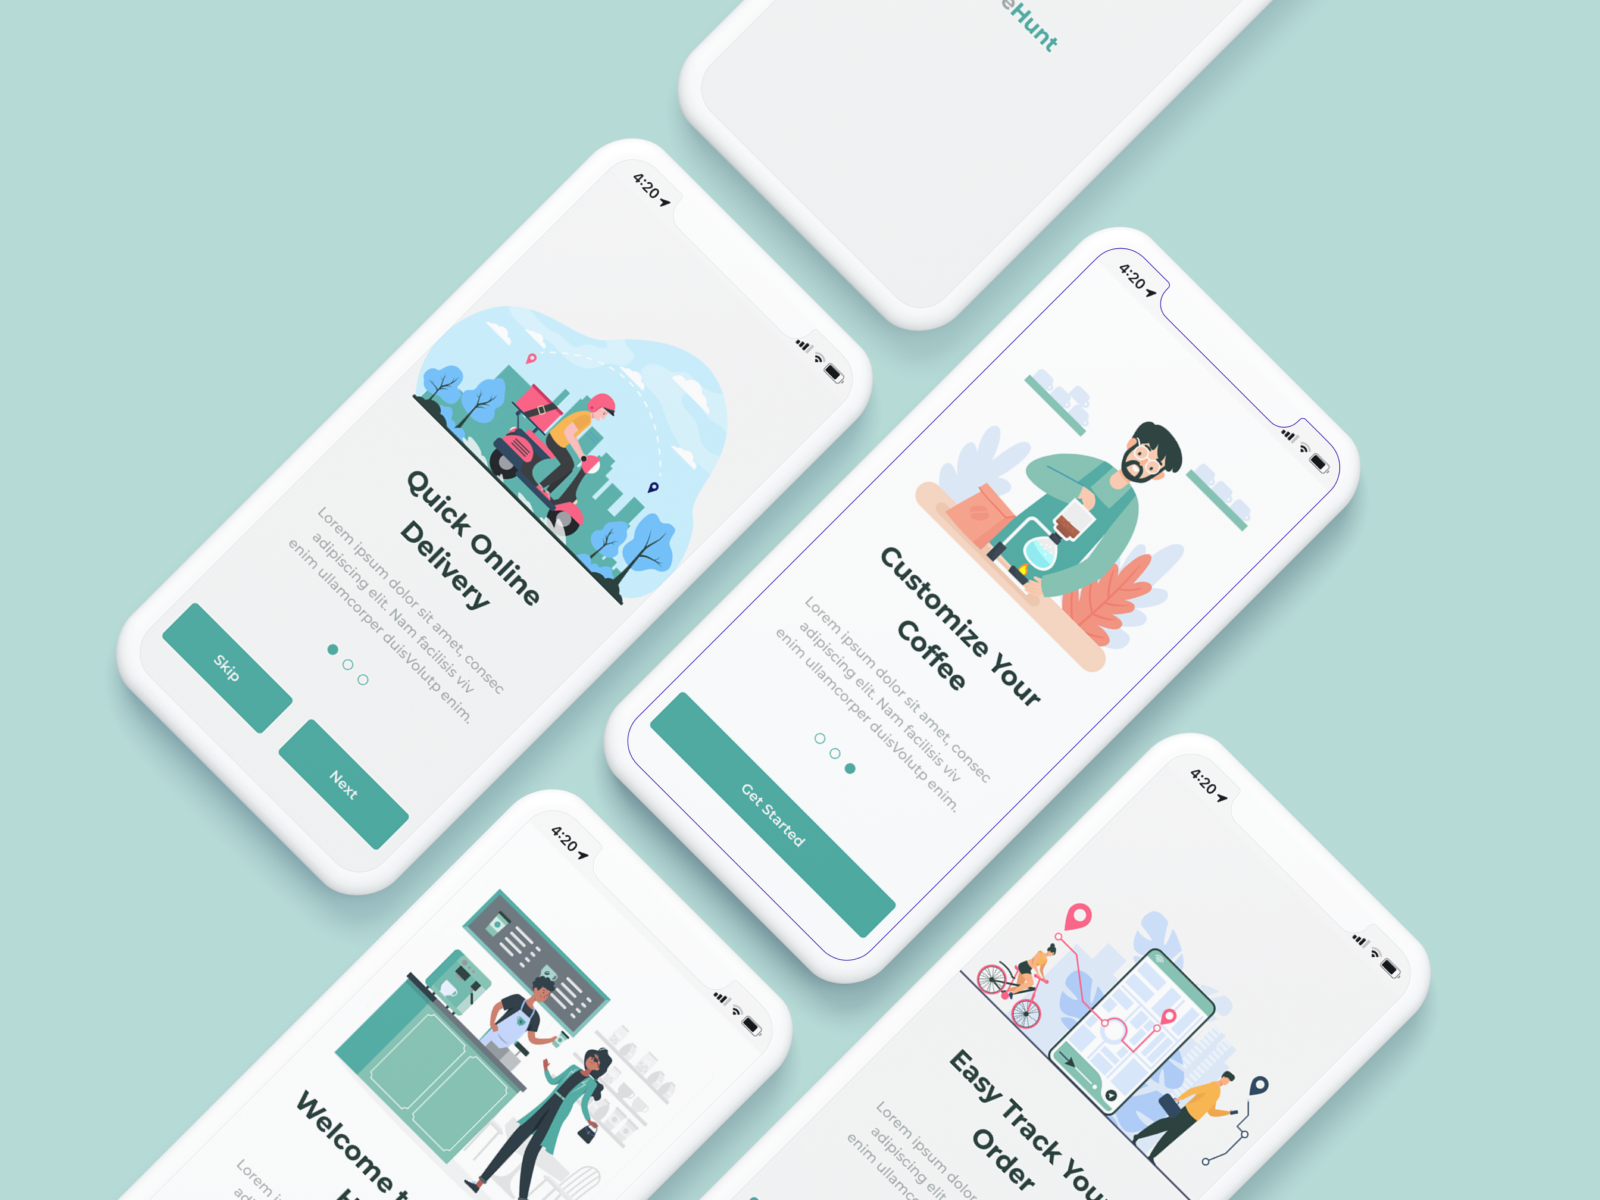 Mobile App Onboarding by muminul.design on Dribbble